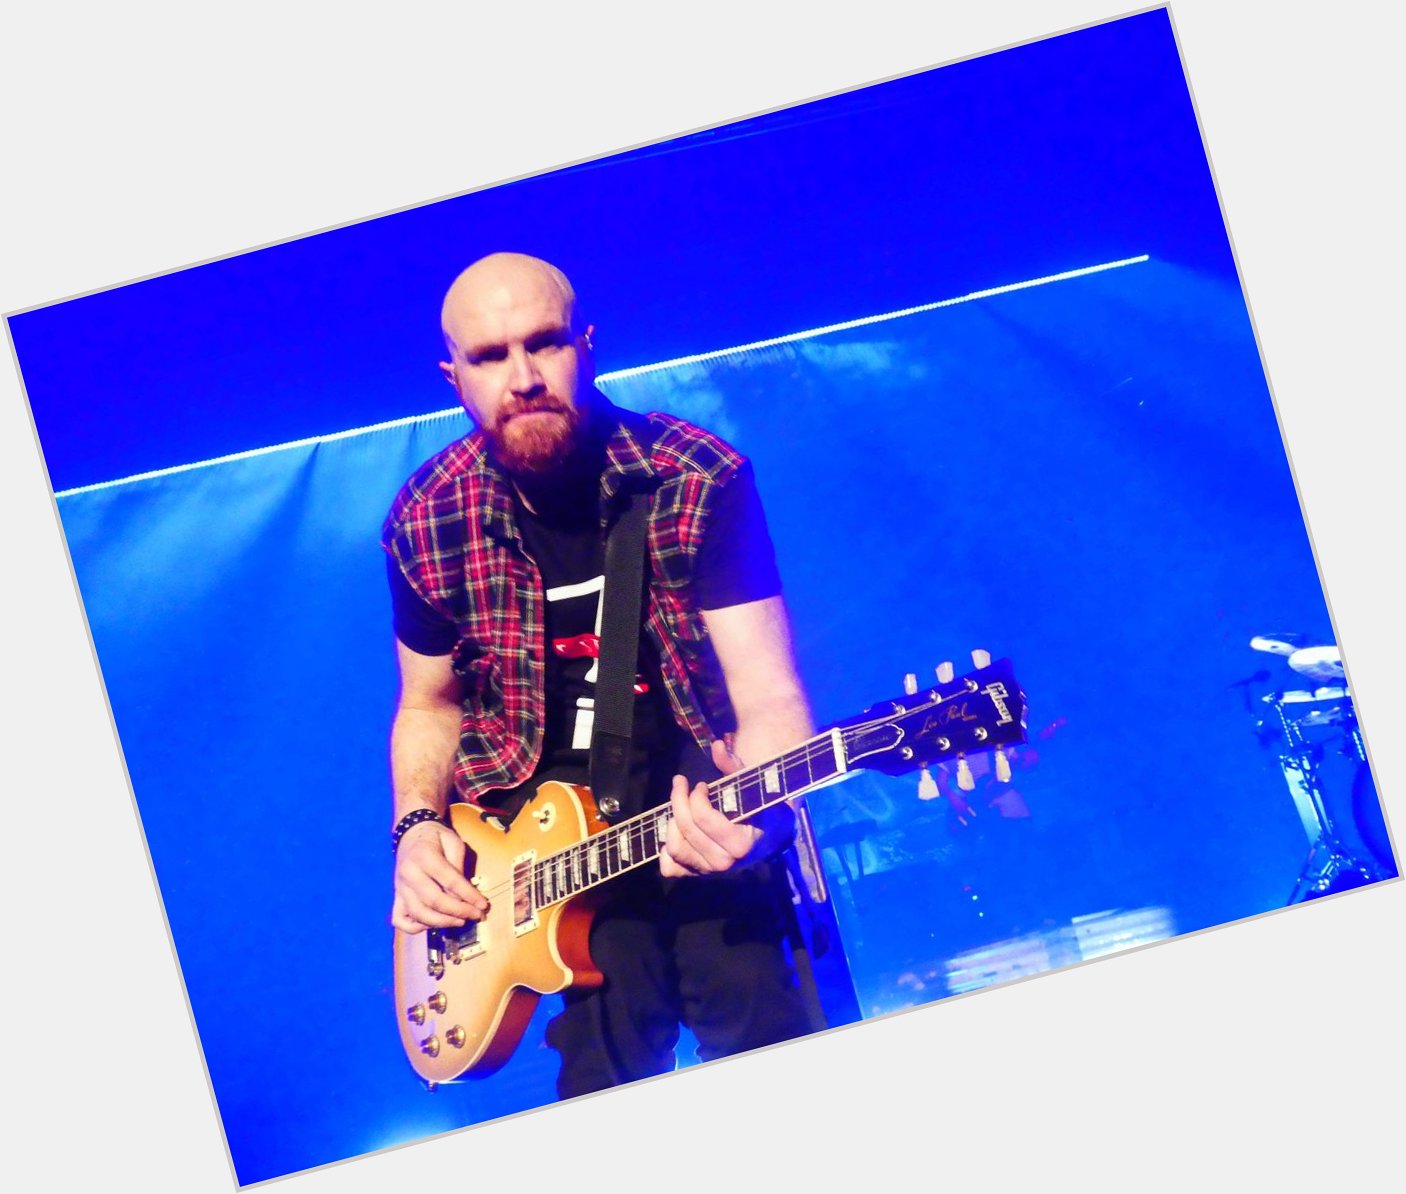 This is a shoutout to the Birthday Boy - Mark Sheehan. Happy Birthday!     